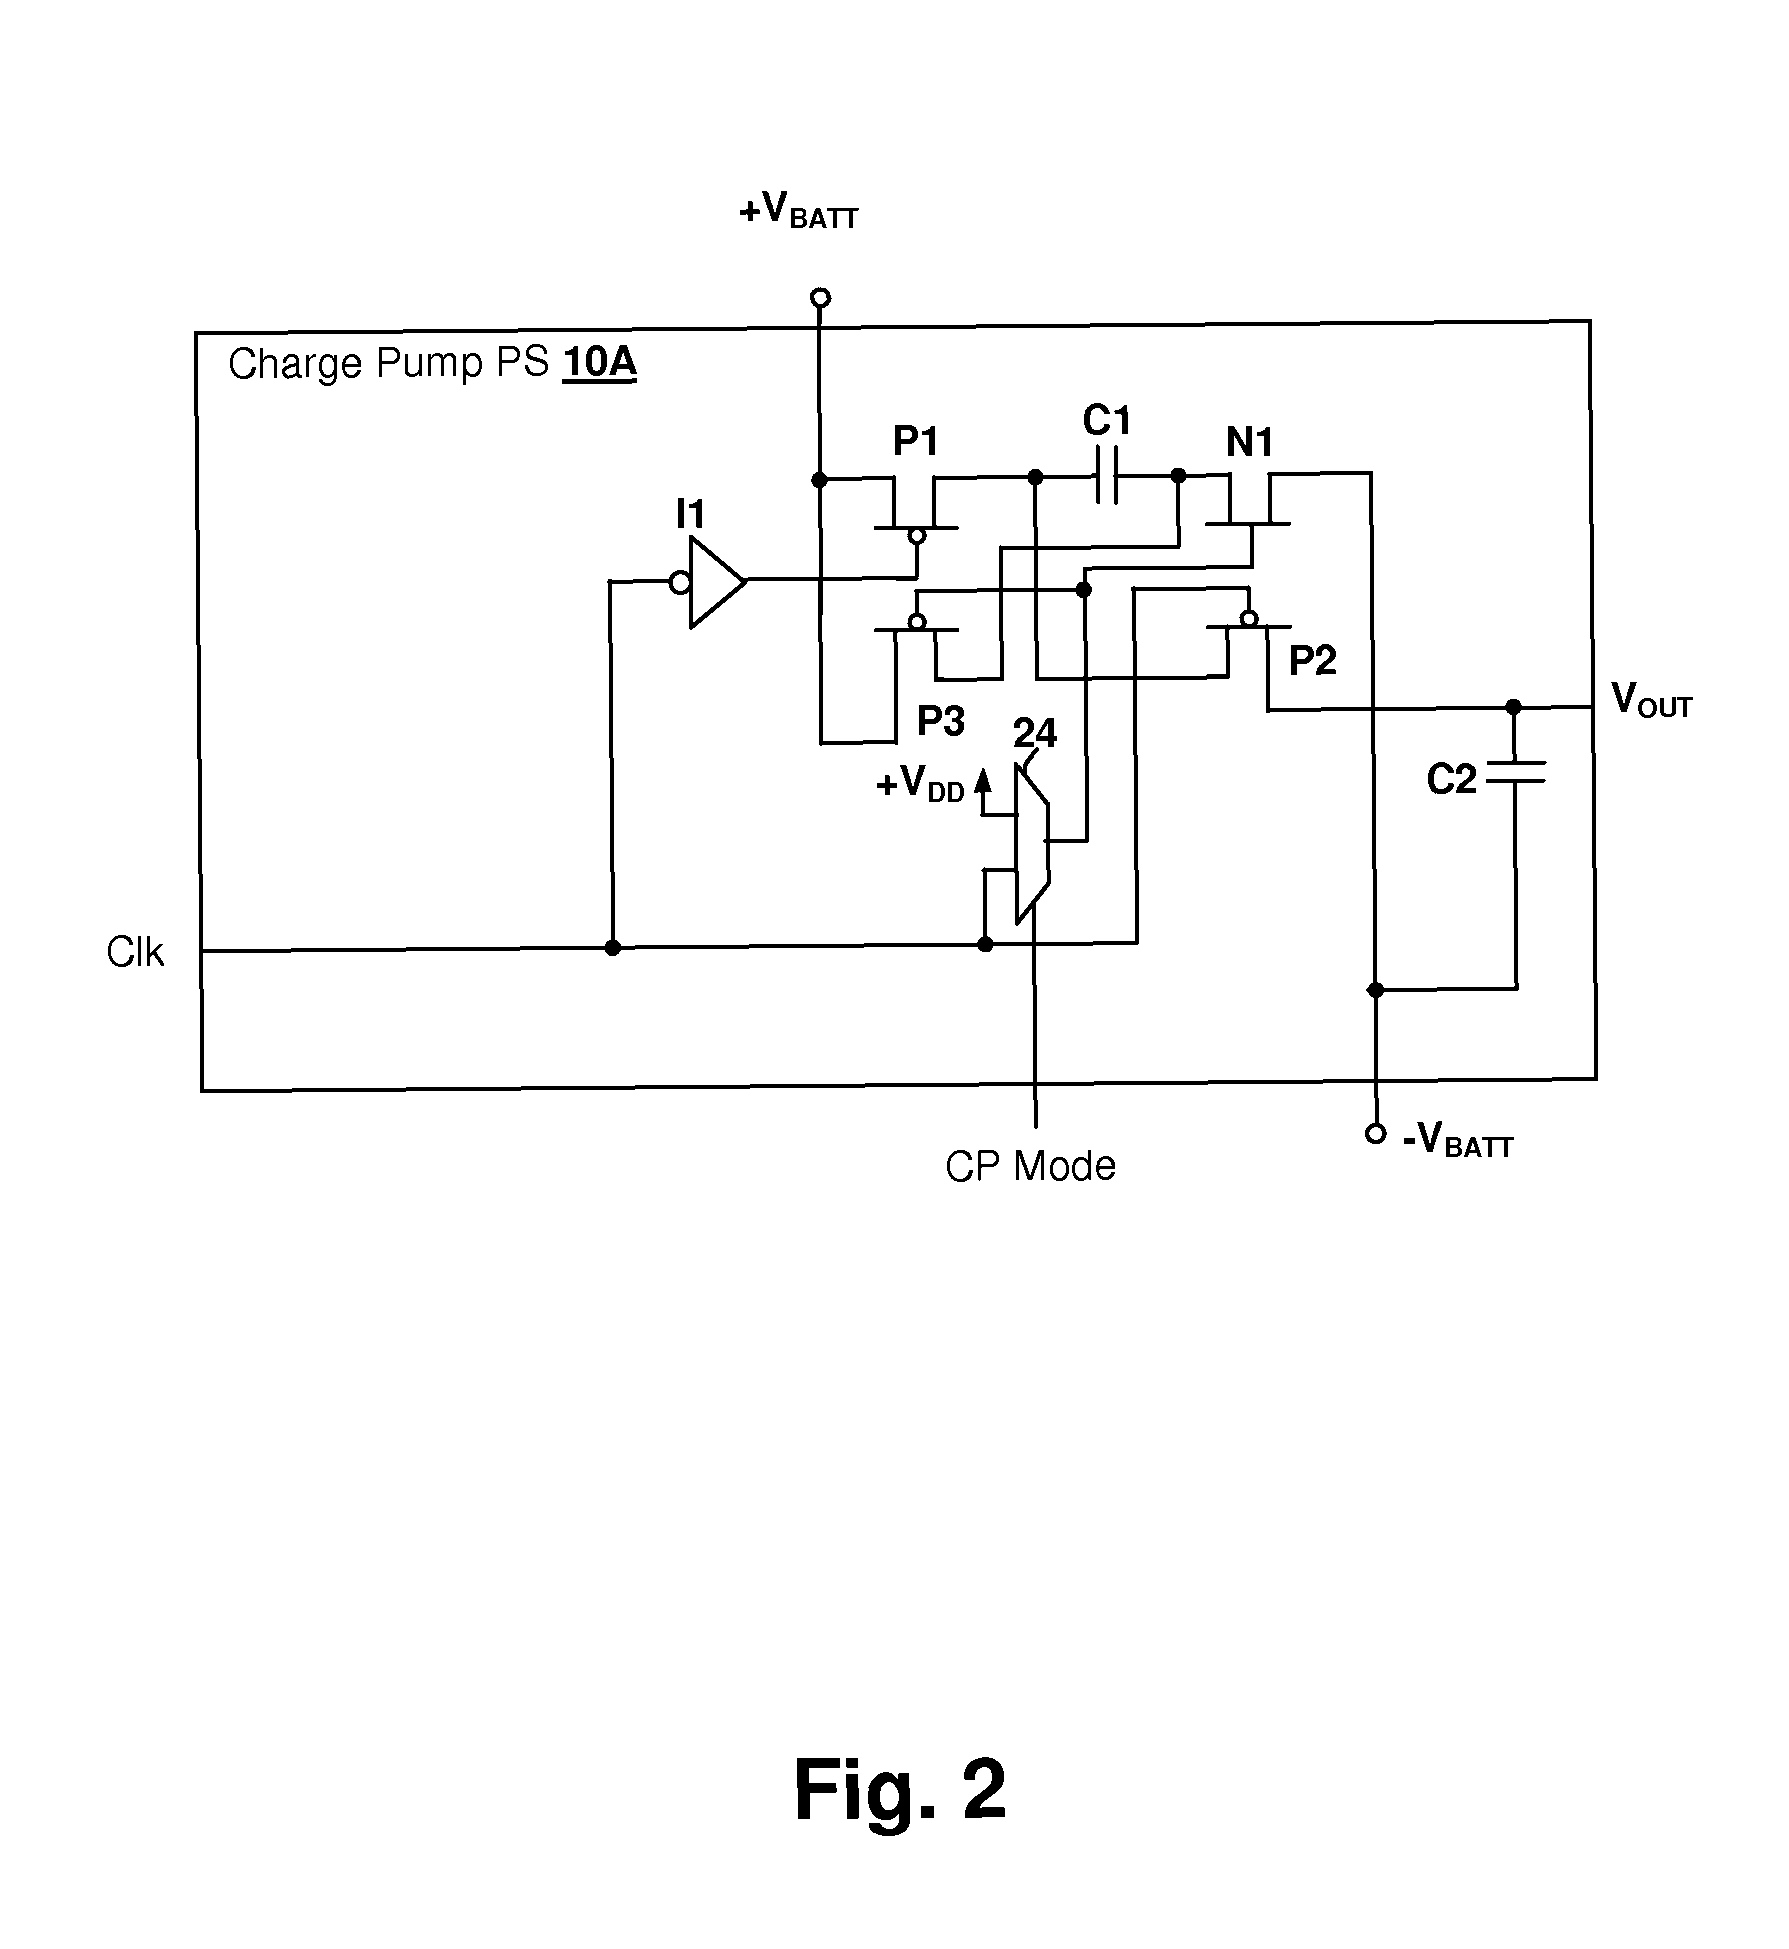 Operating environment and process position selected charge-pump operating mode in an audio power amplifier integrated circuit